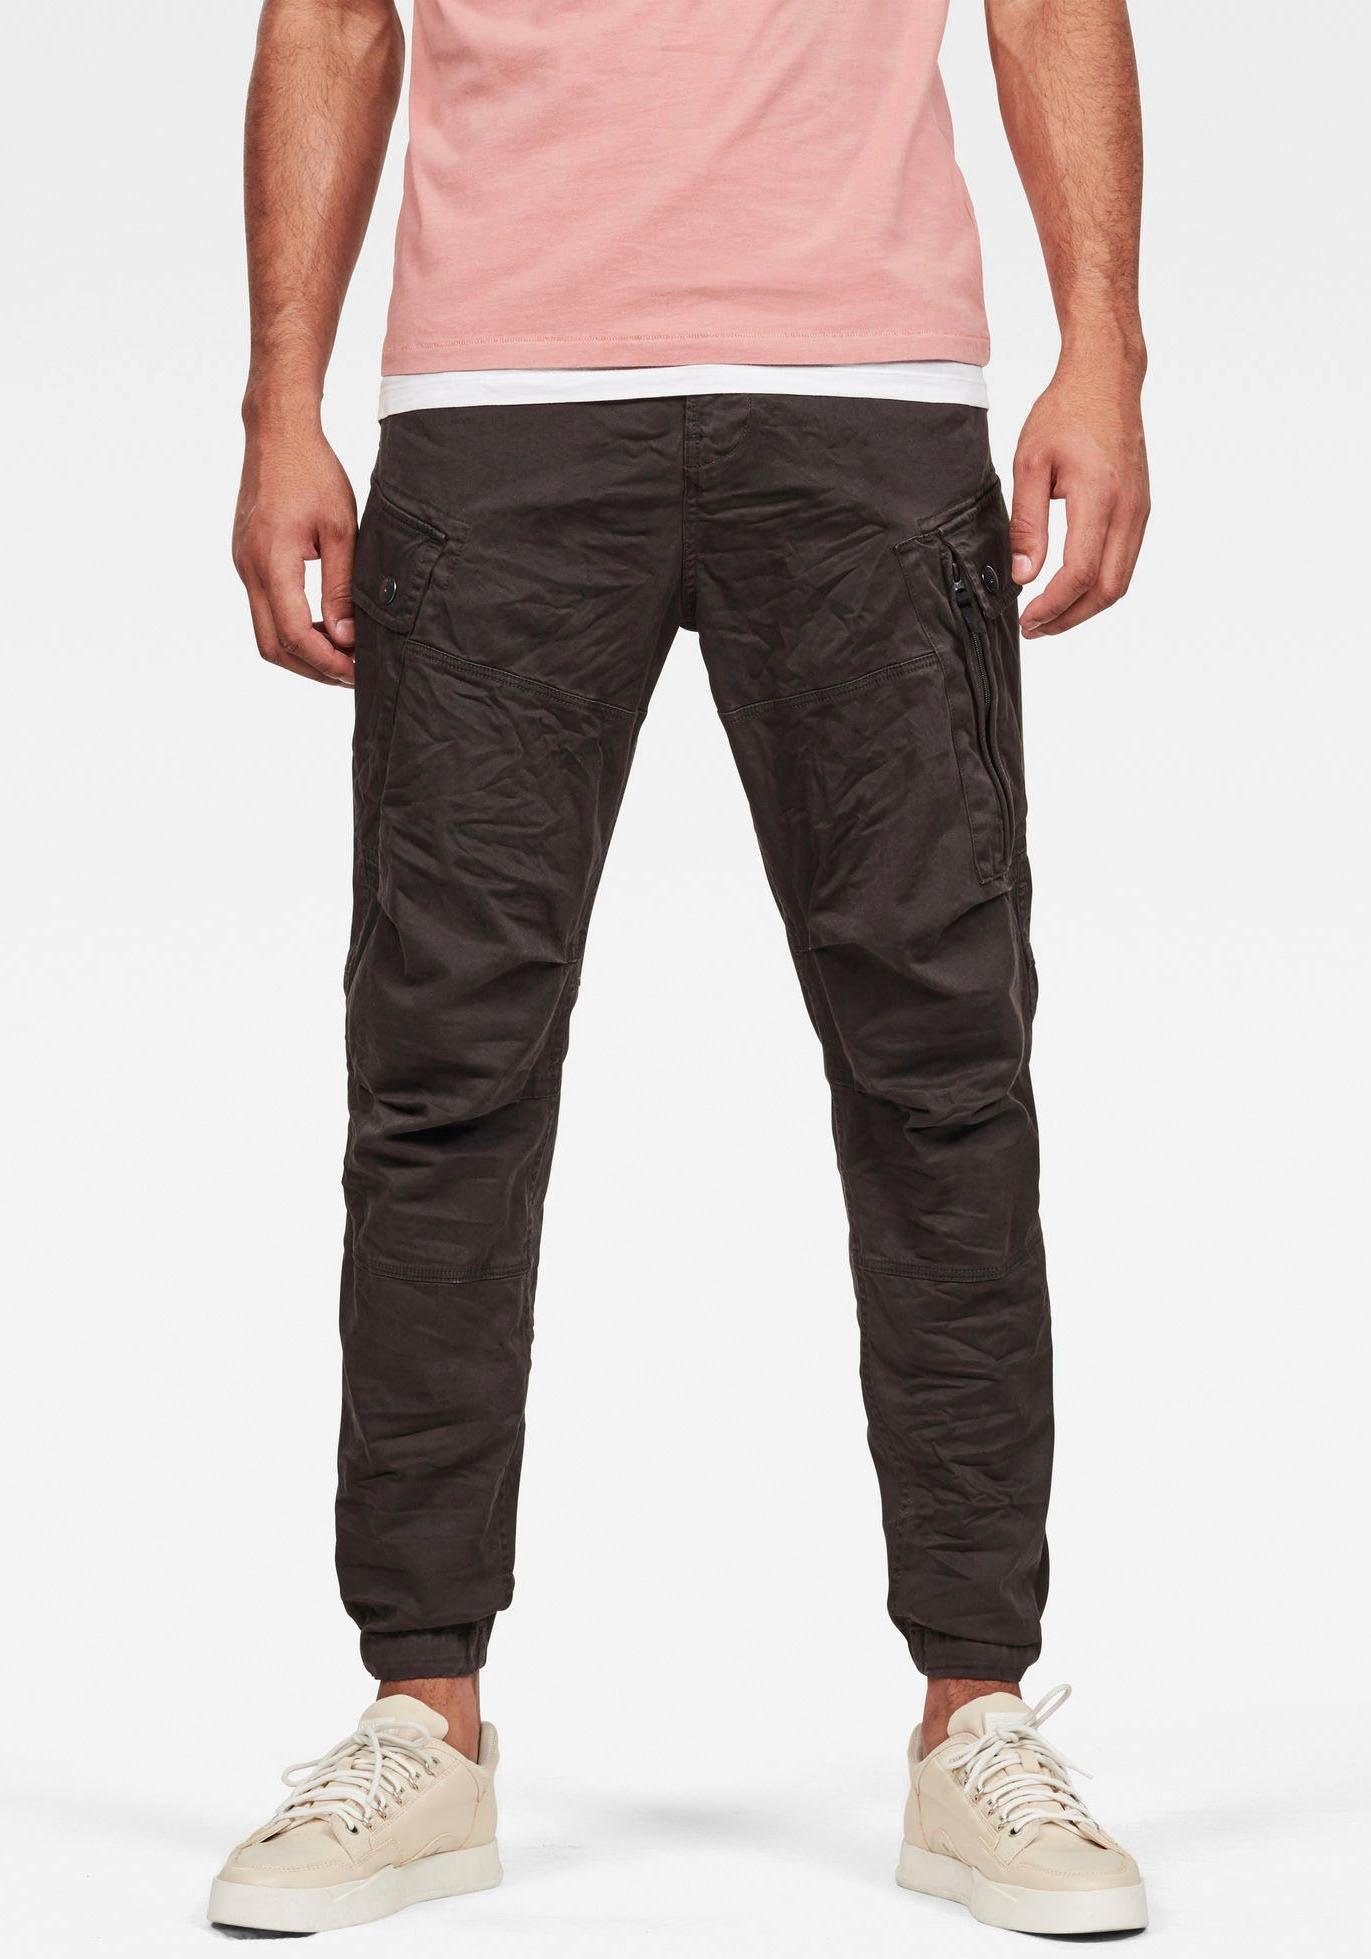 G-Star RAW Cargohose »Roxic«, Tapered-fit online kaufen | OTTO